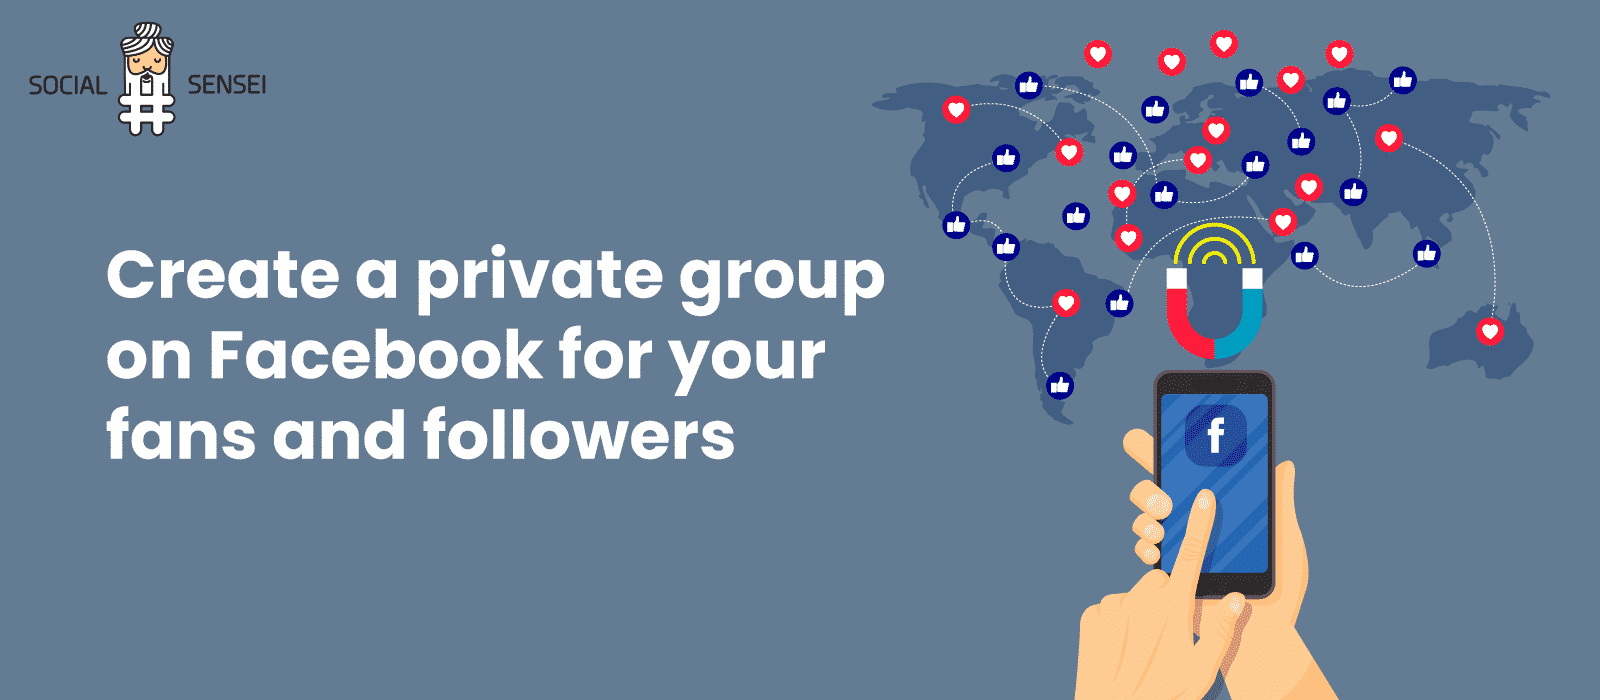 Create a private group on Facebook for your fans and followers